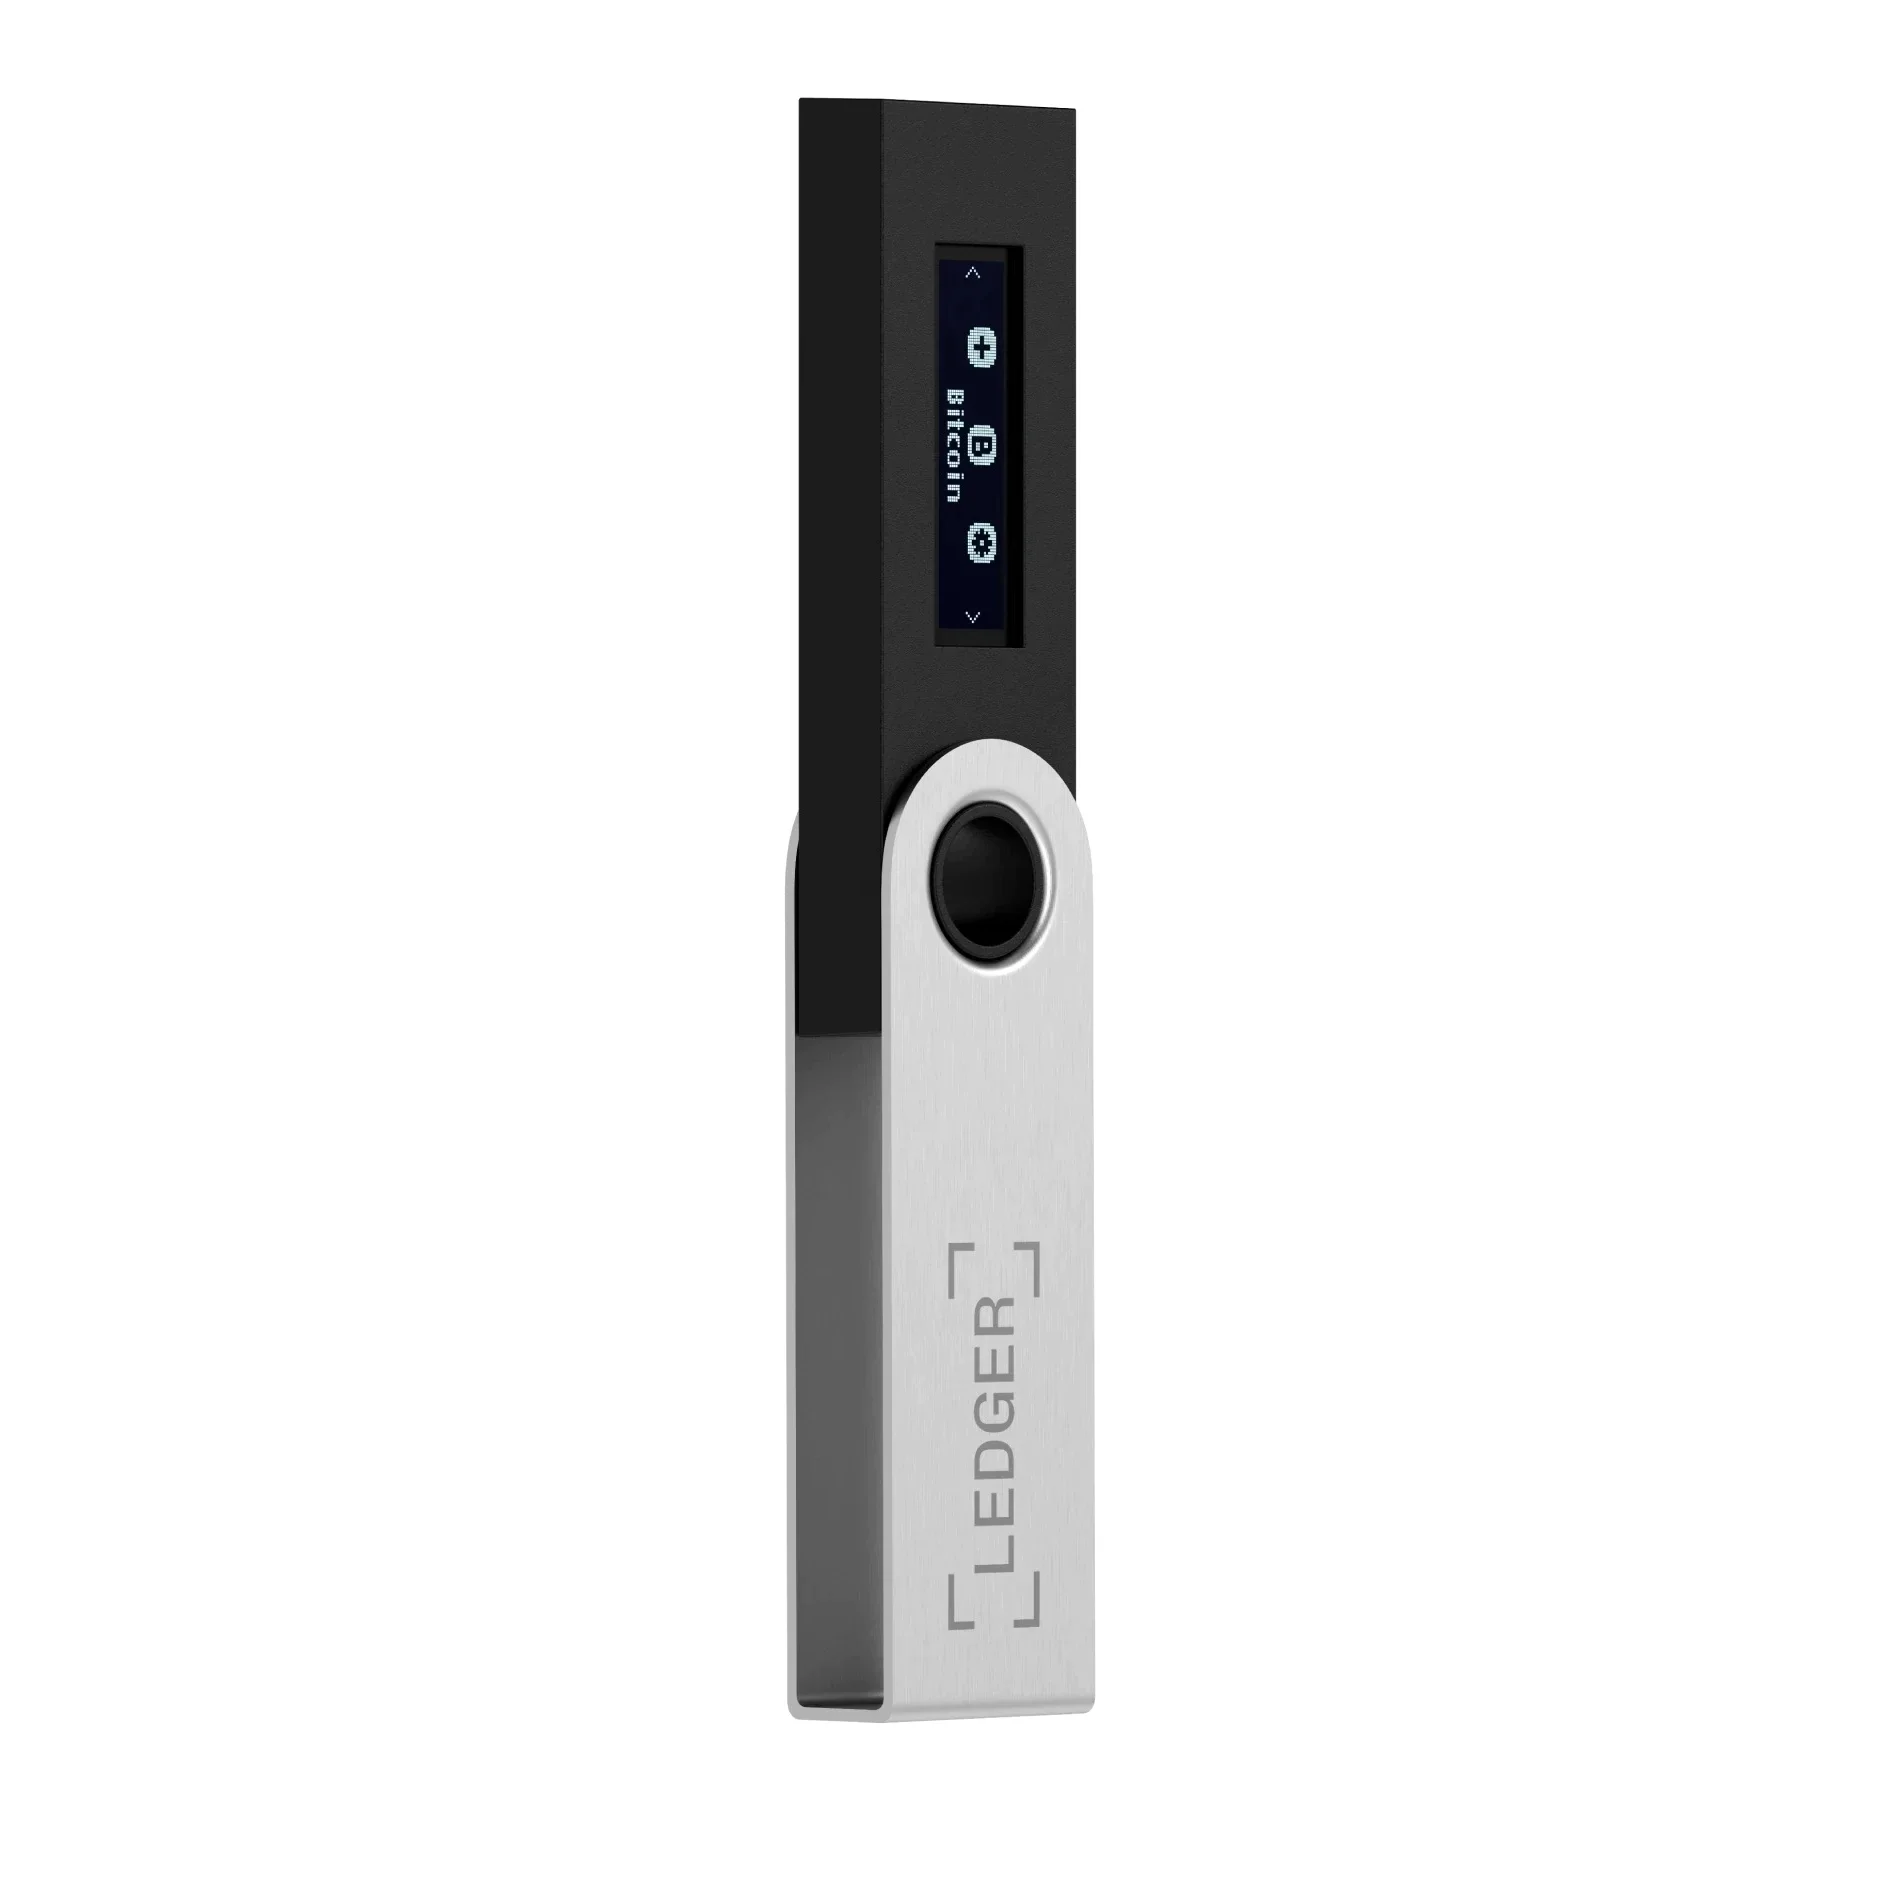 Hardware wallets for Baby Doge Coin (BABYDOGE) - Hardware wallets - coinmag.fun